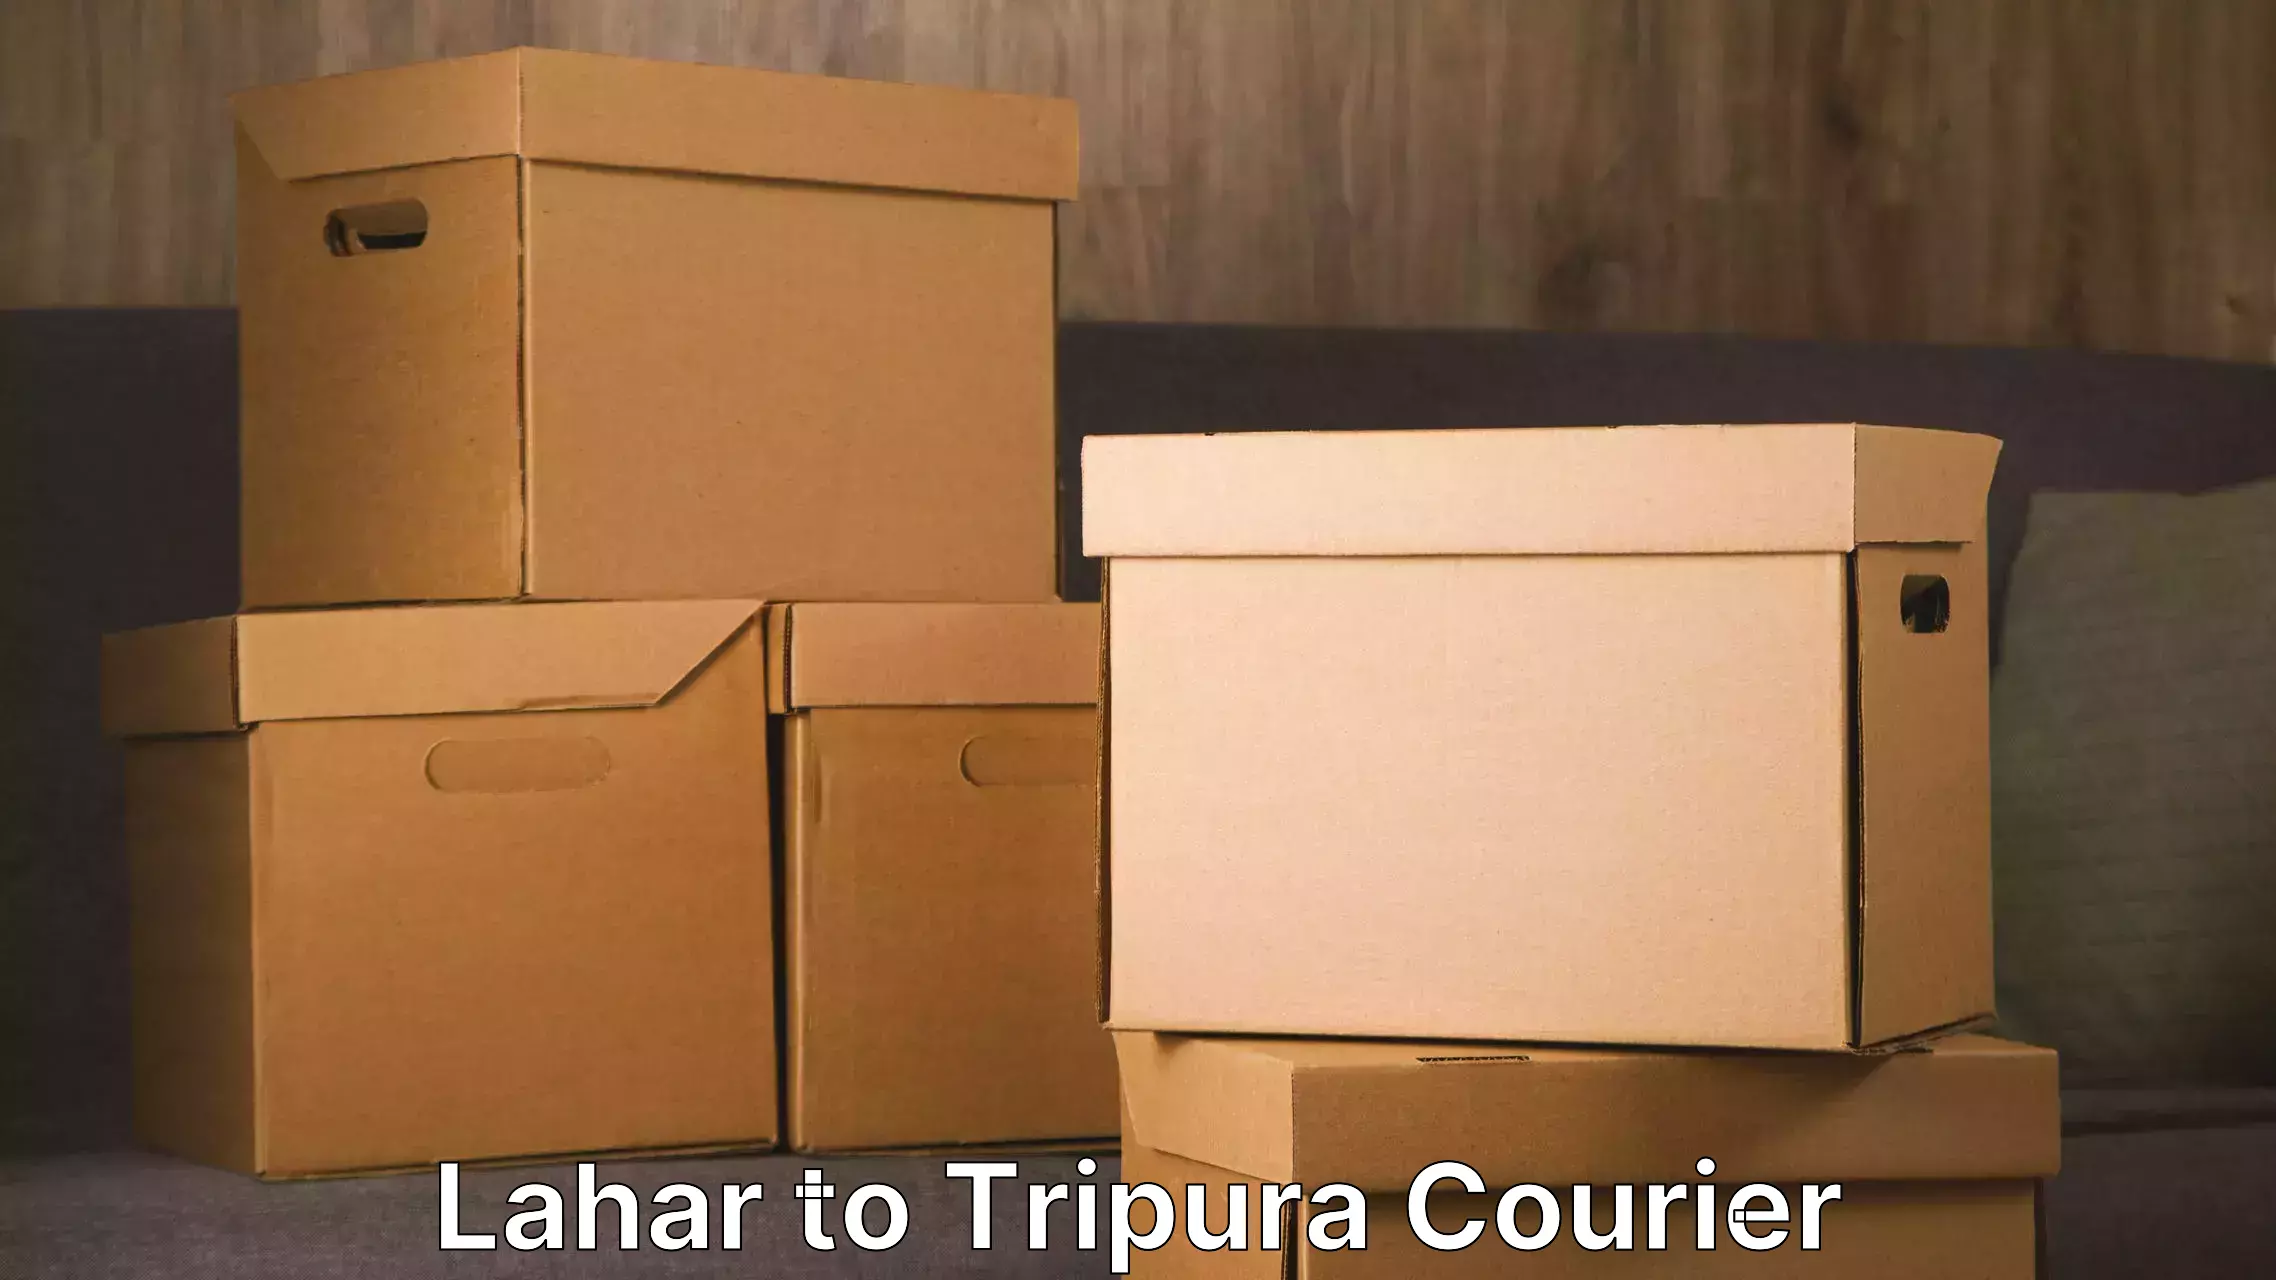 Full-service relocation Lahar to Udaipur Tripura